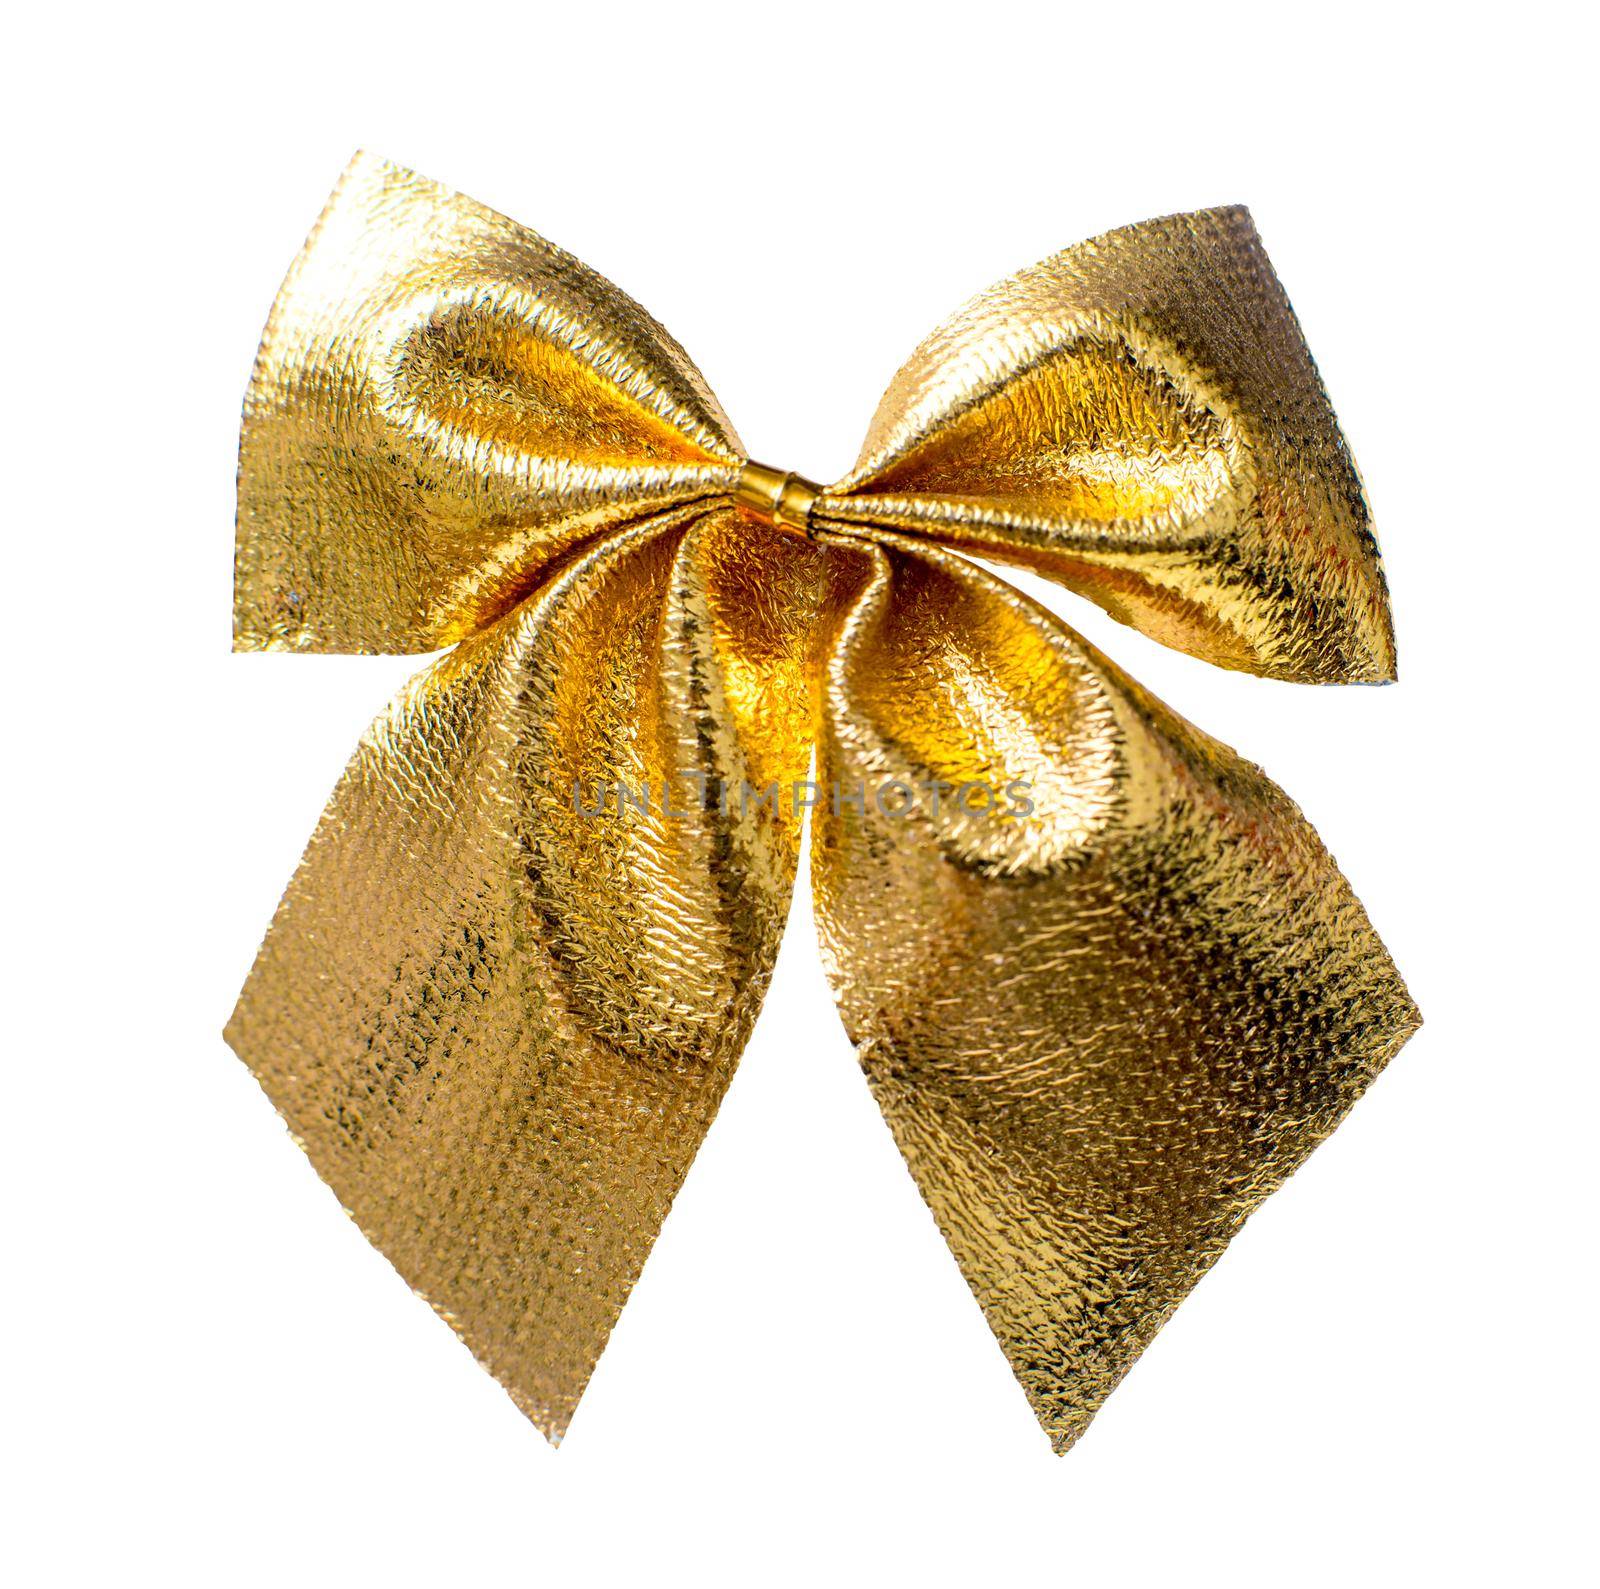 Gold Christmas bow close up isolated on a white background